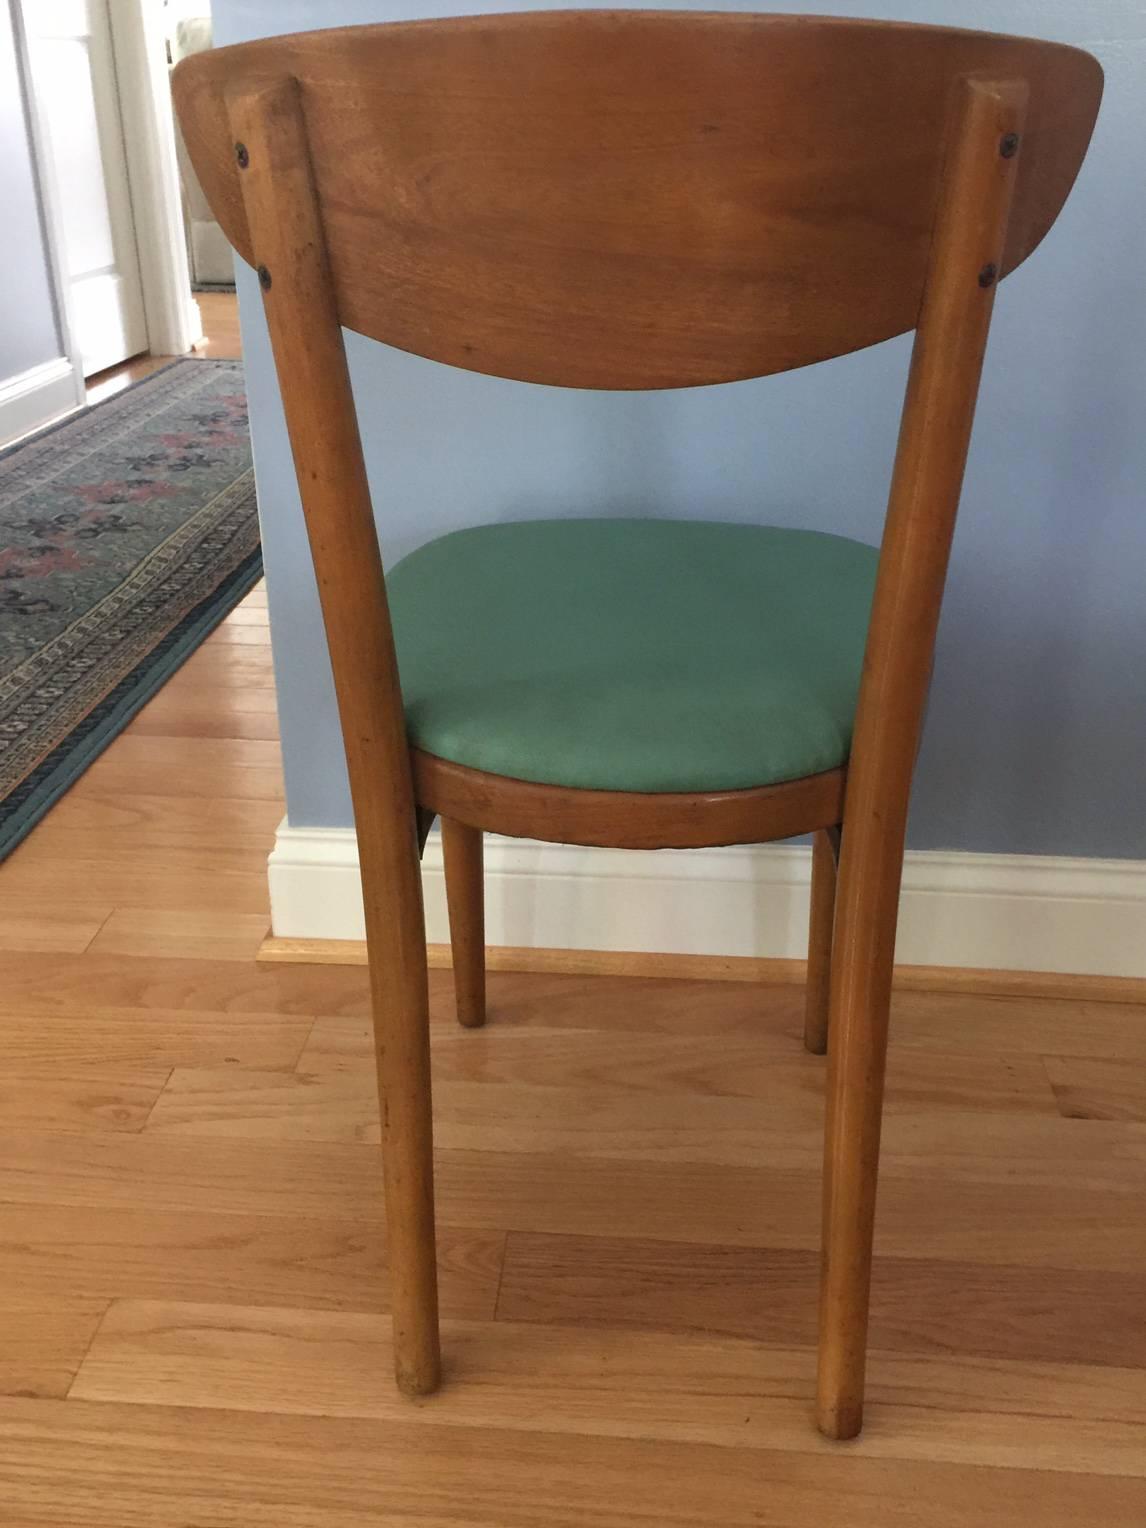 These chairs are labeled as manufactured by Thonet and also have a label (partially shown in one photo) of Knoll. They were probably manufactured in the 1930s and originally had a felt upholstery, which was subsequently replaced with the green vinyl